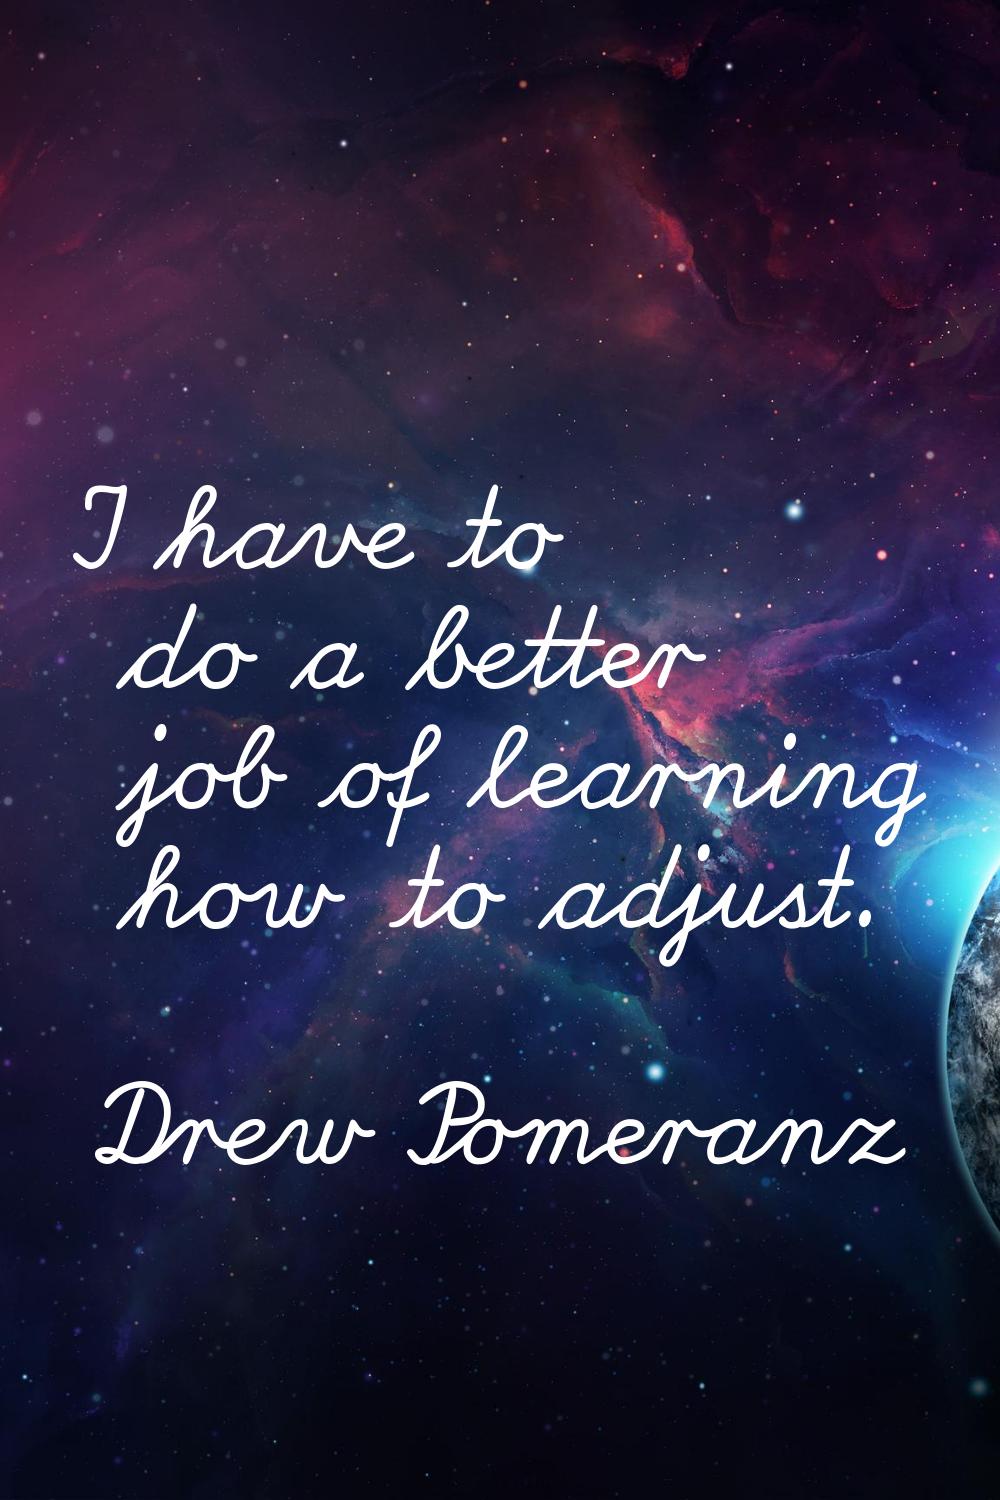 I have to do a better job of learning how to adjust.